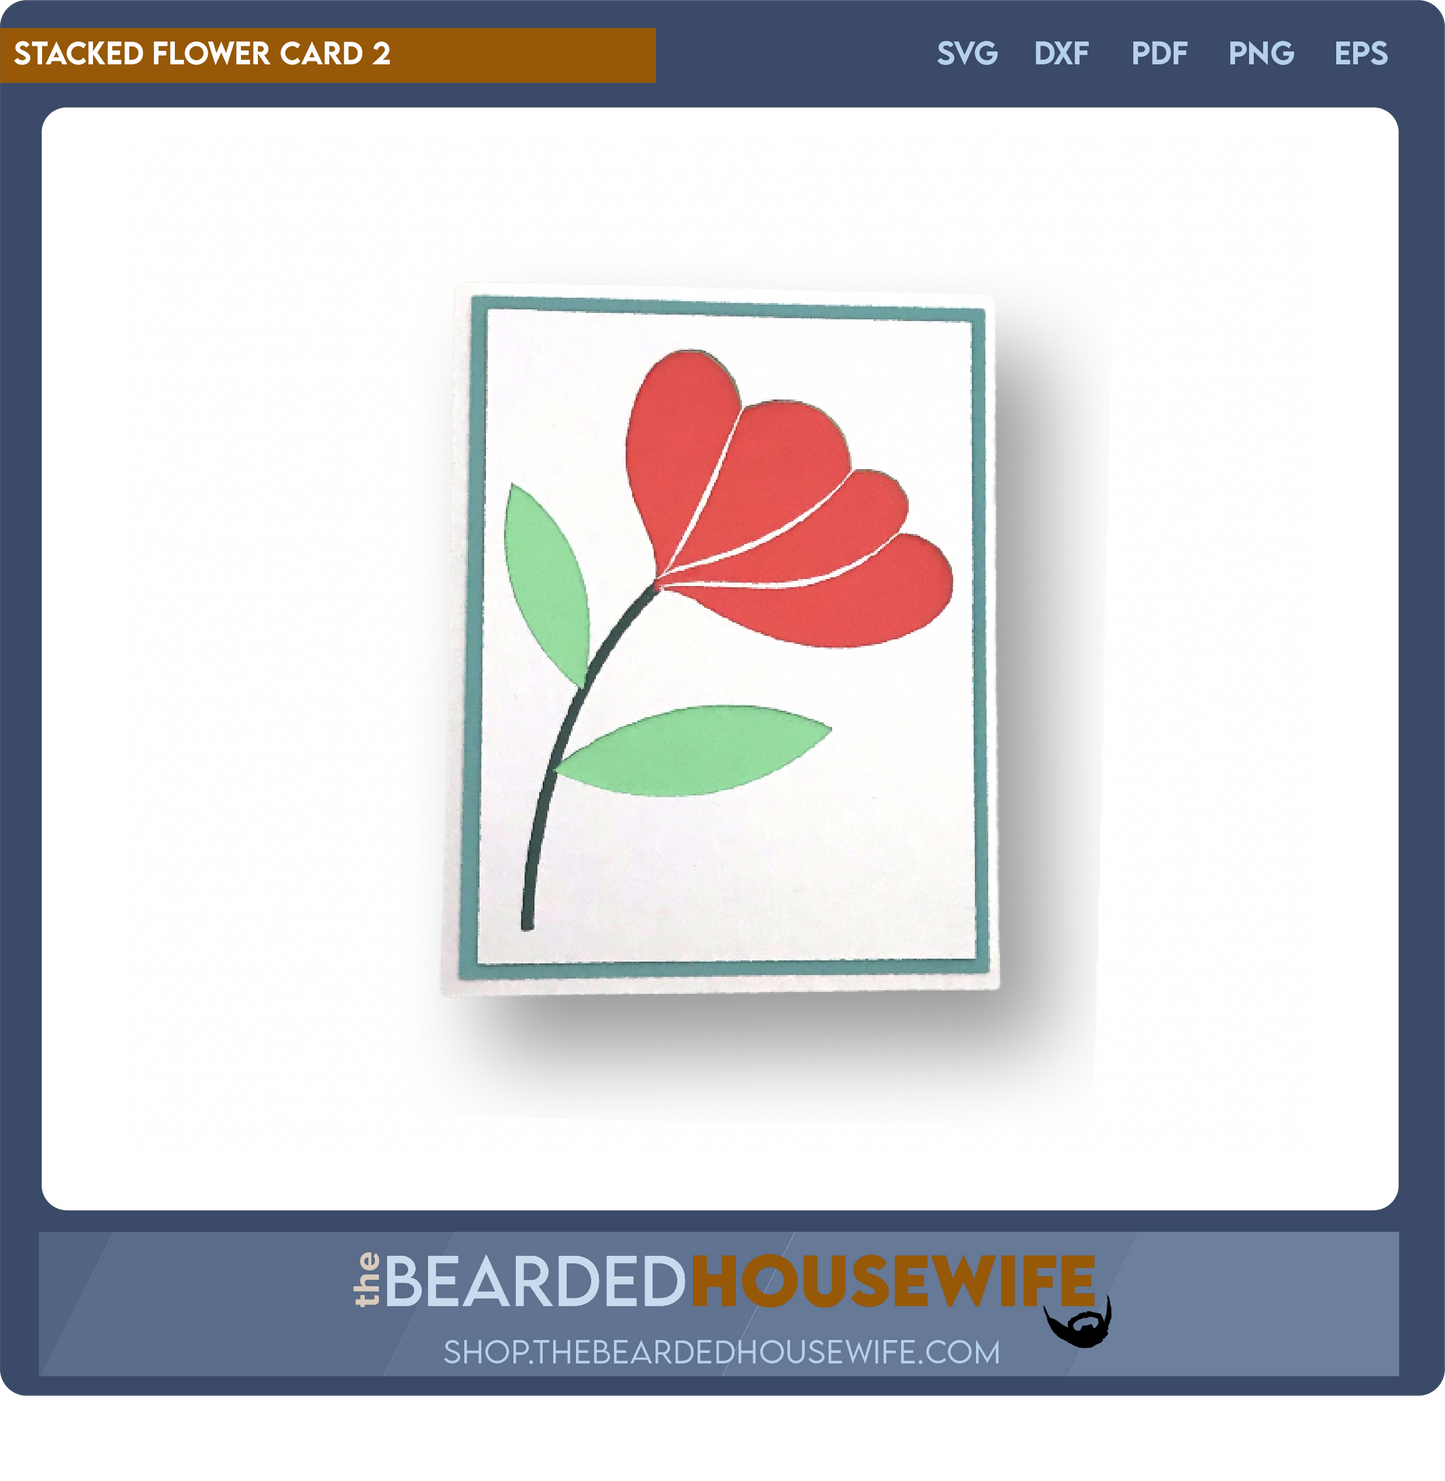 Stacked Flower Card 2